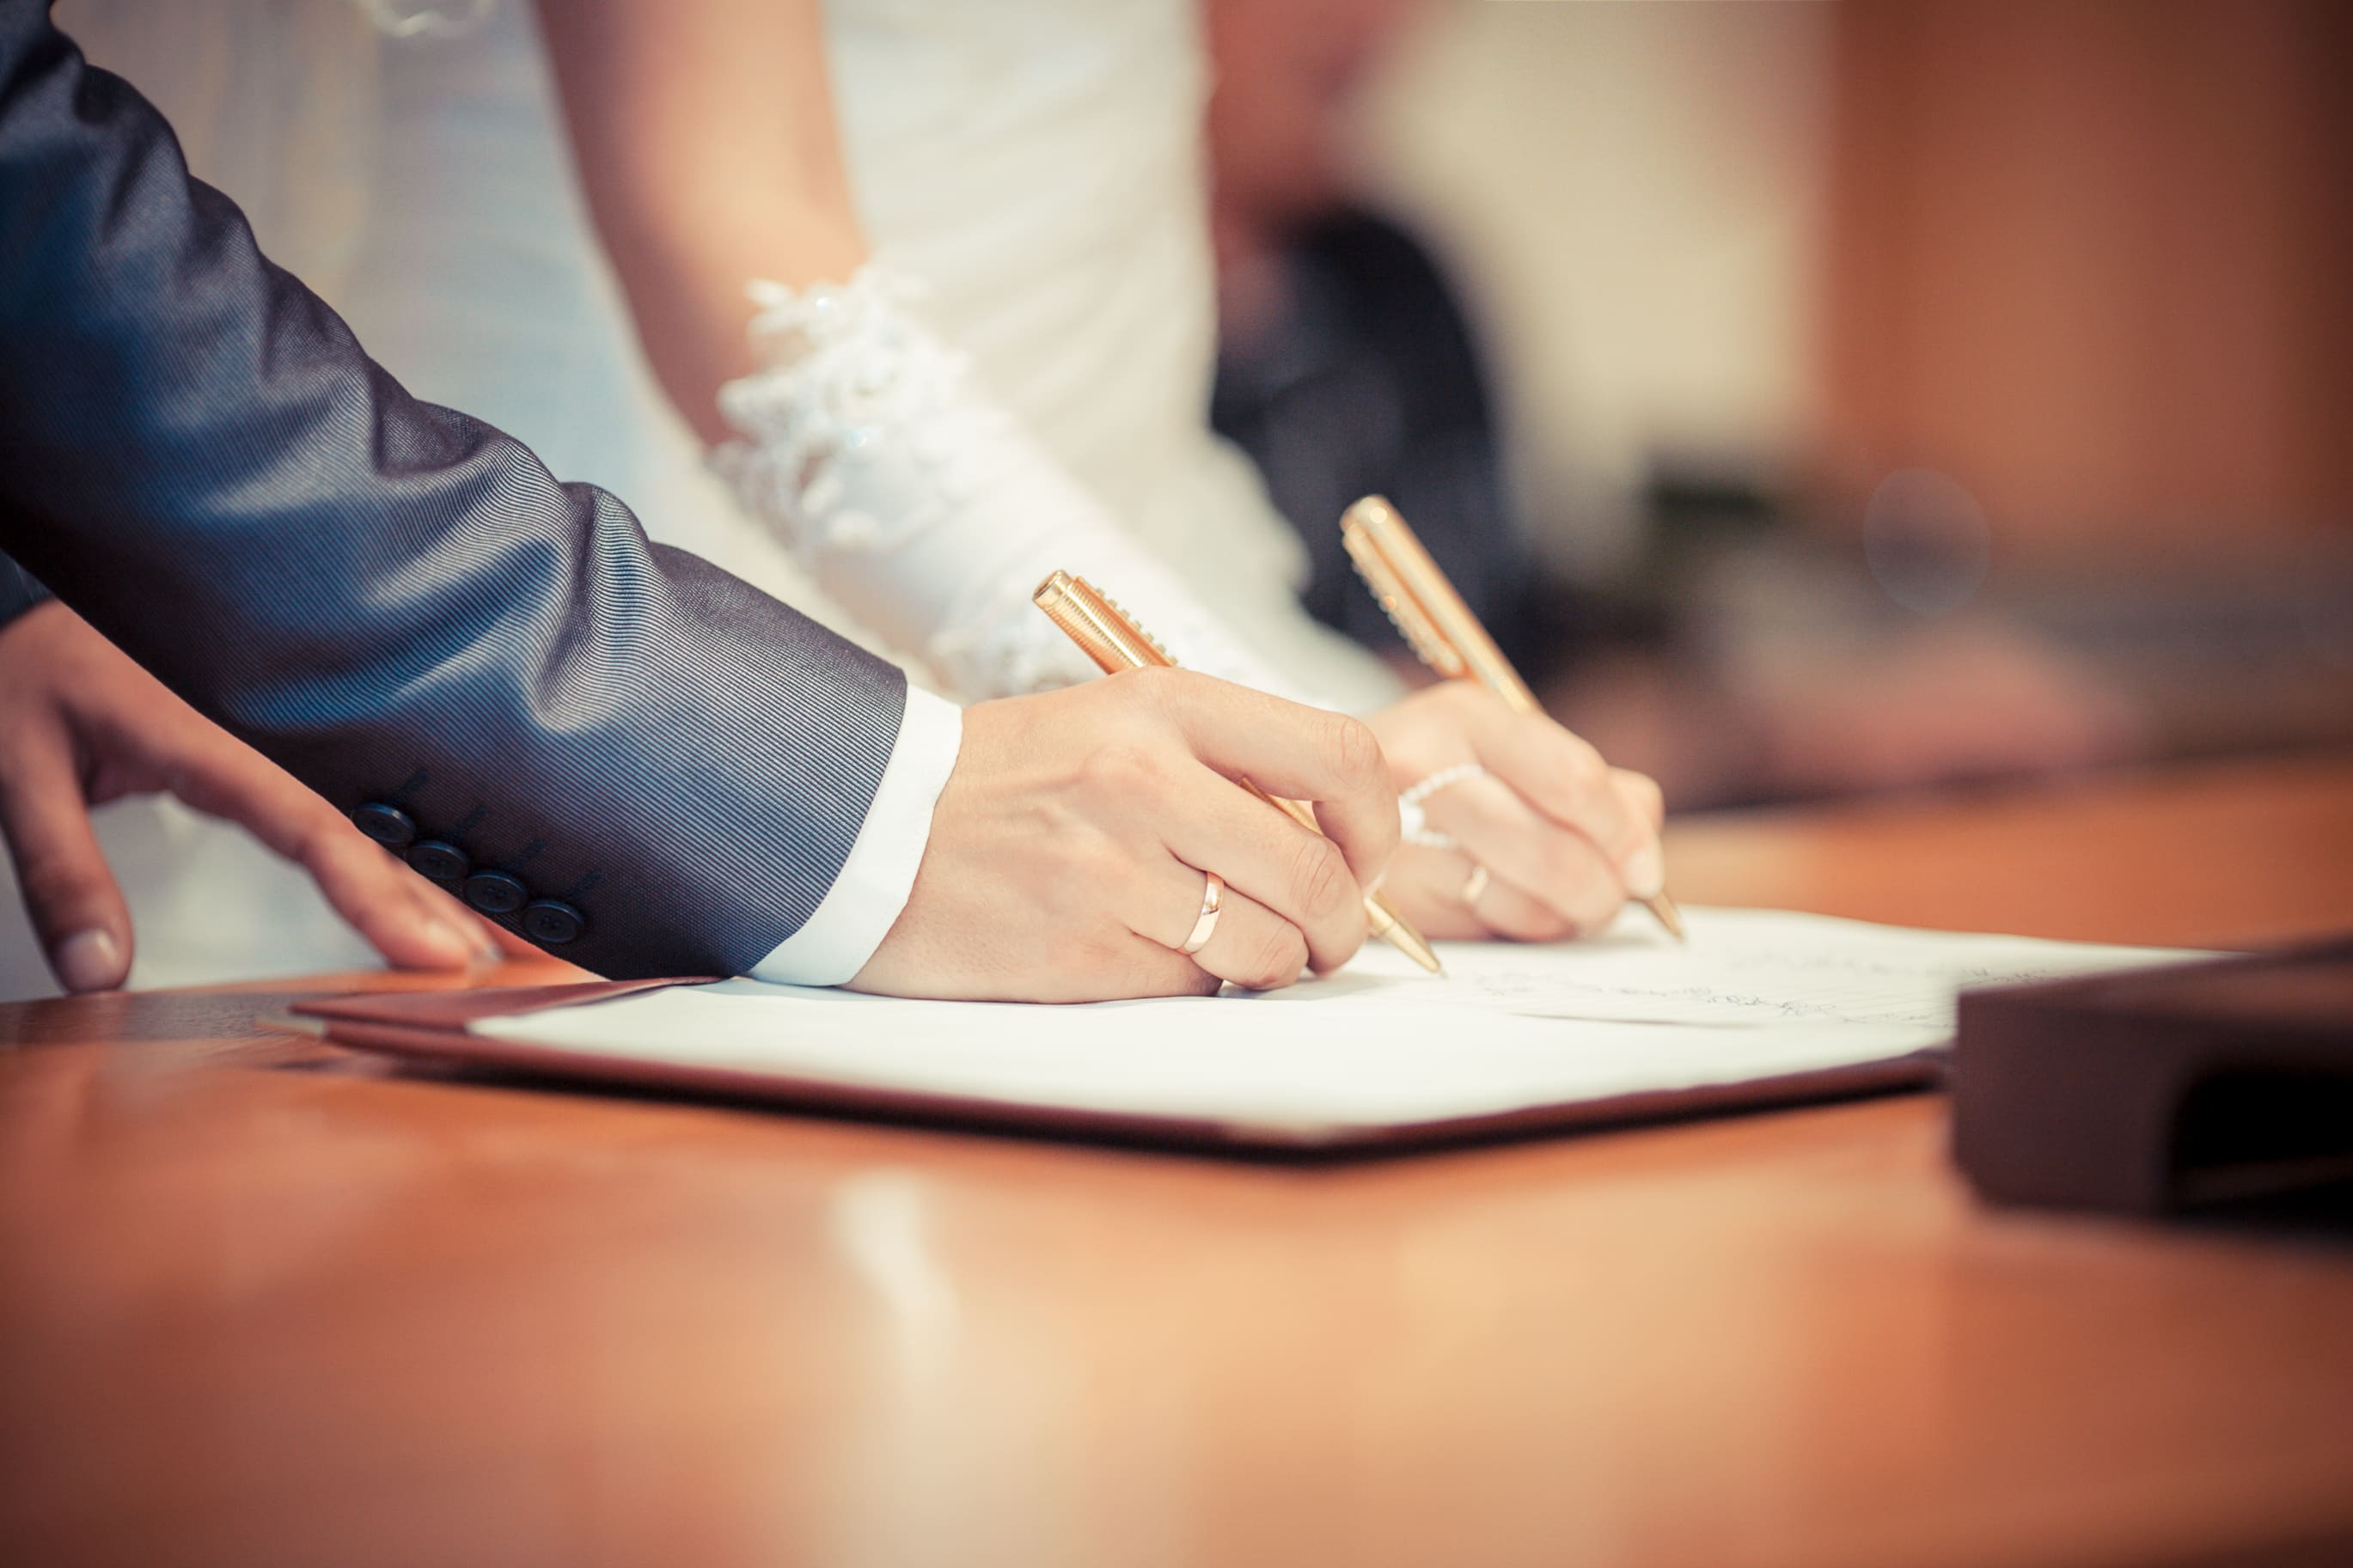 Hands of a married couple signing document together.